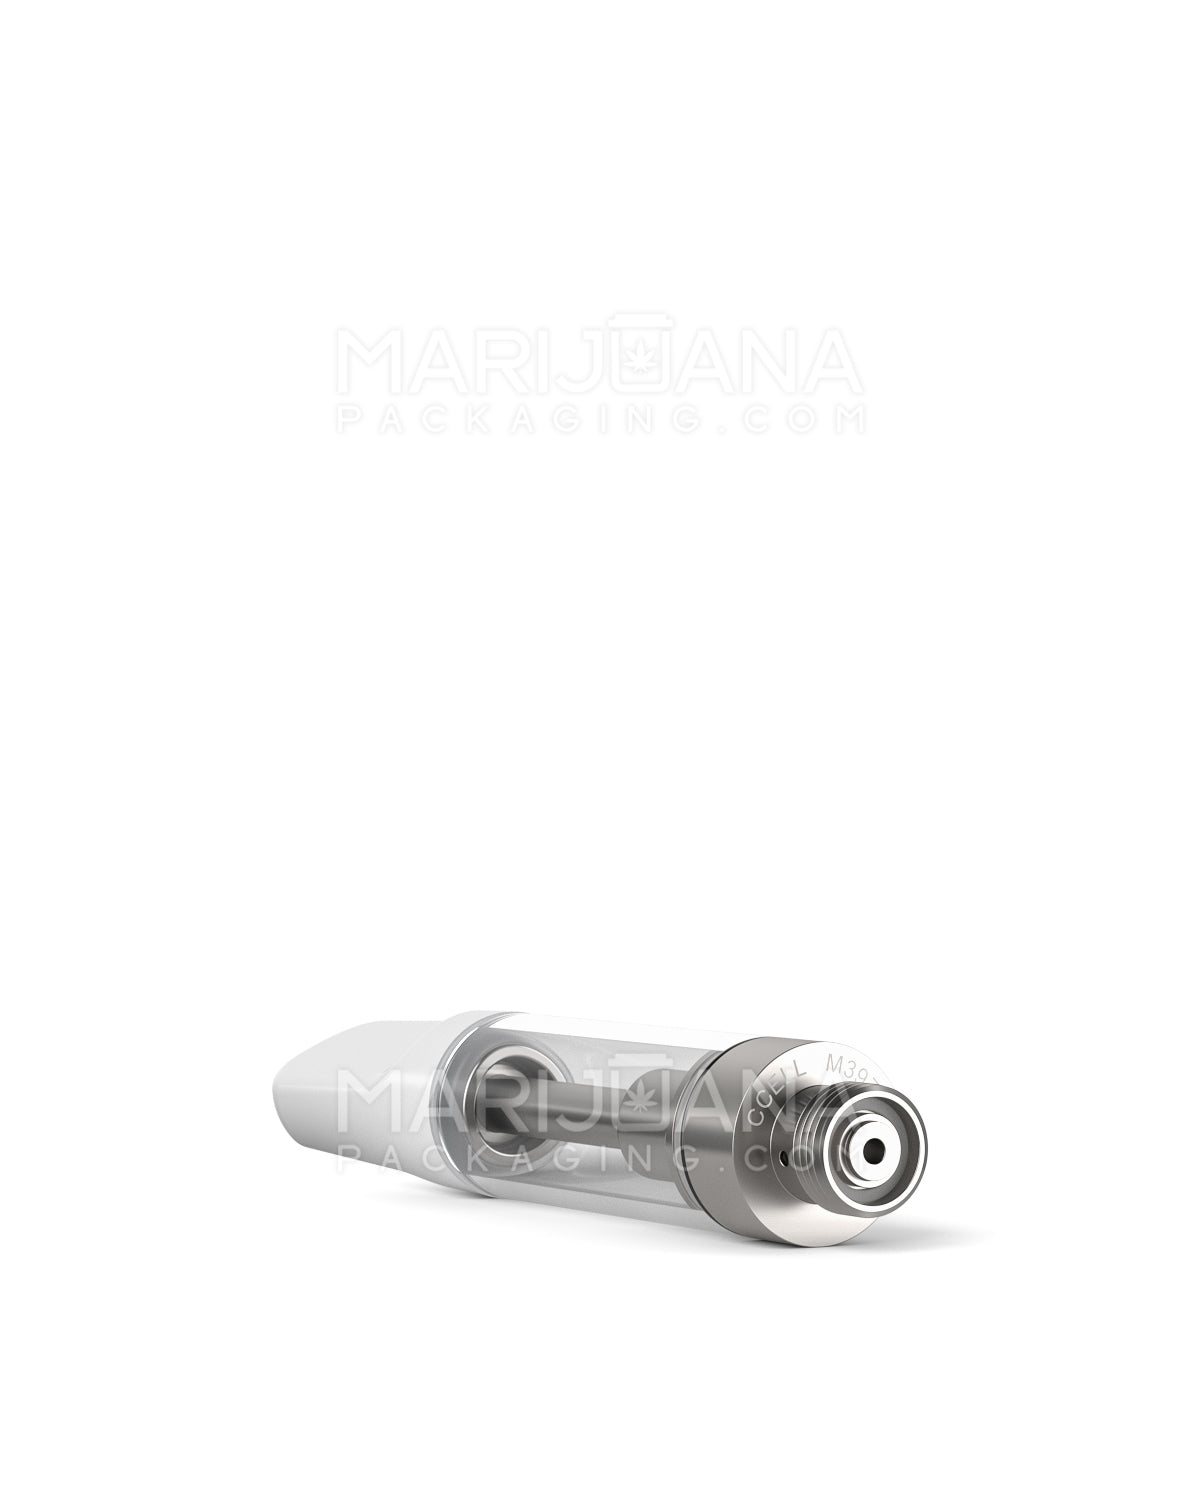 CCELL | Liquid6 Reactor Glass Vape Cartridge with White Ceramic Mouthpiece | 1mL - Screw On - 100 Count - 7